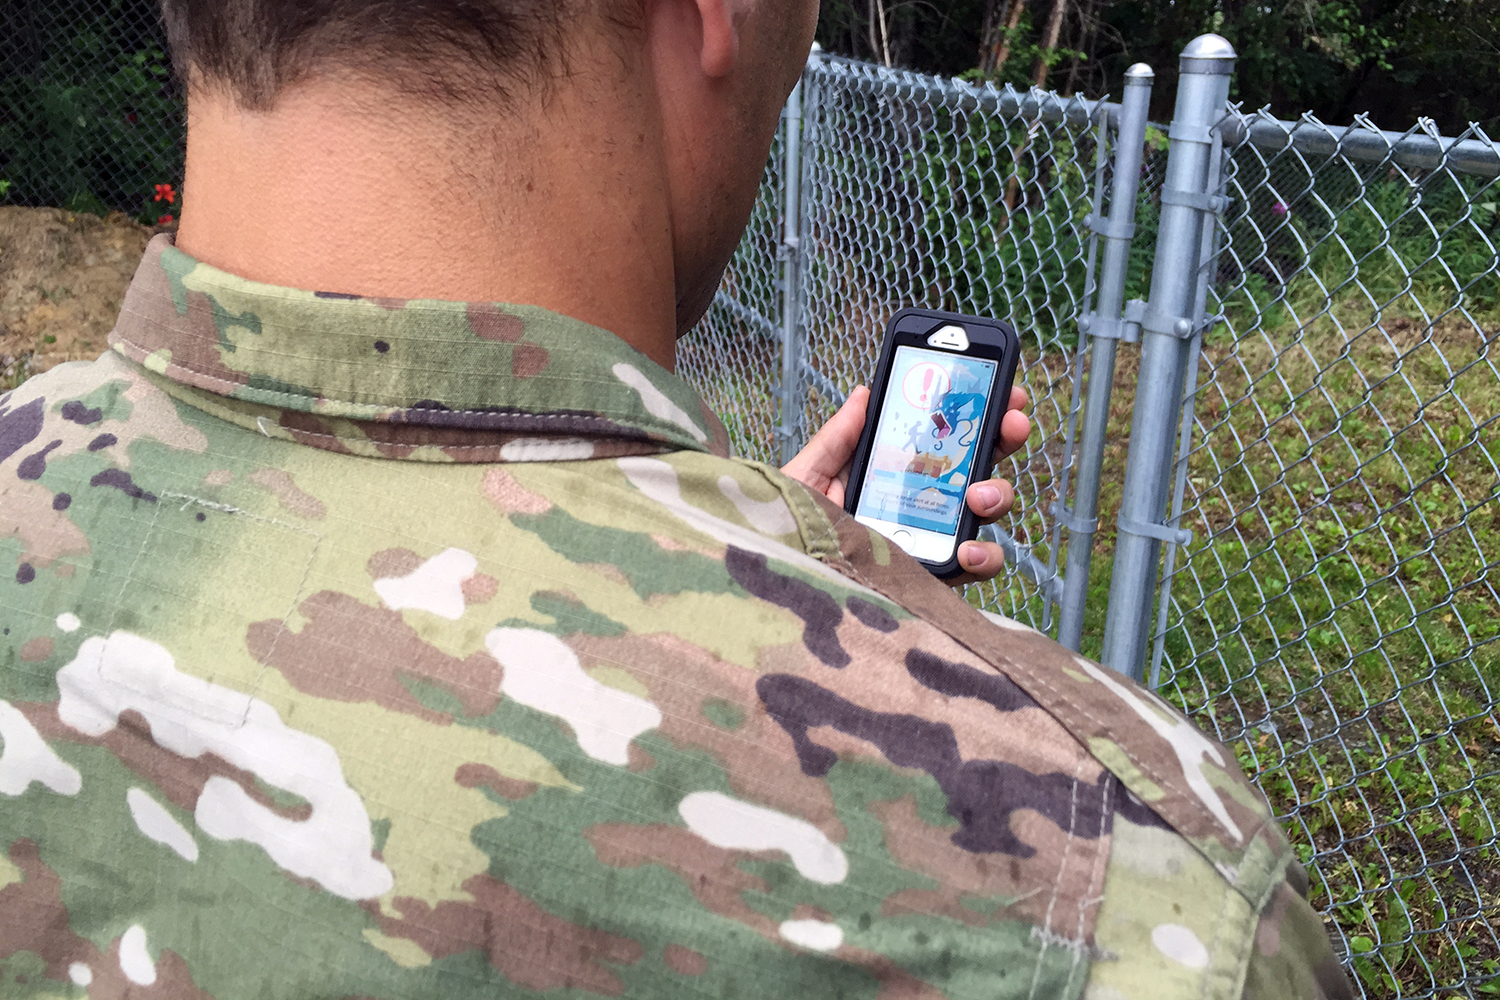 Base to Troops: Don't Chase Virtual Pokemon into Restricted Areas | Military.com1500 x 1000